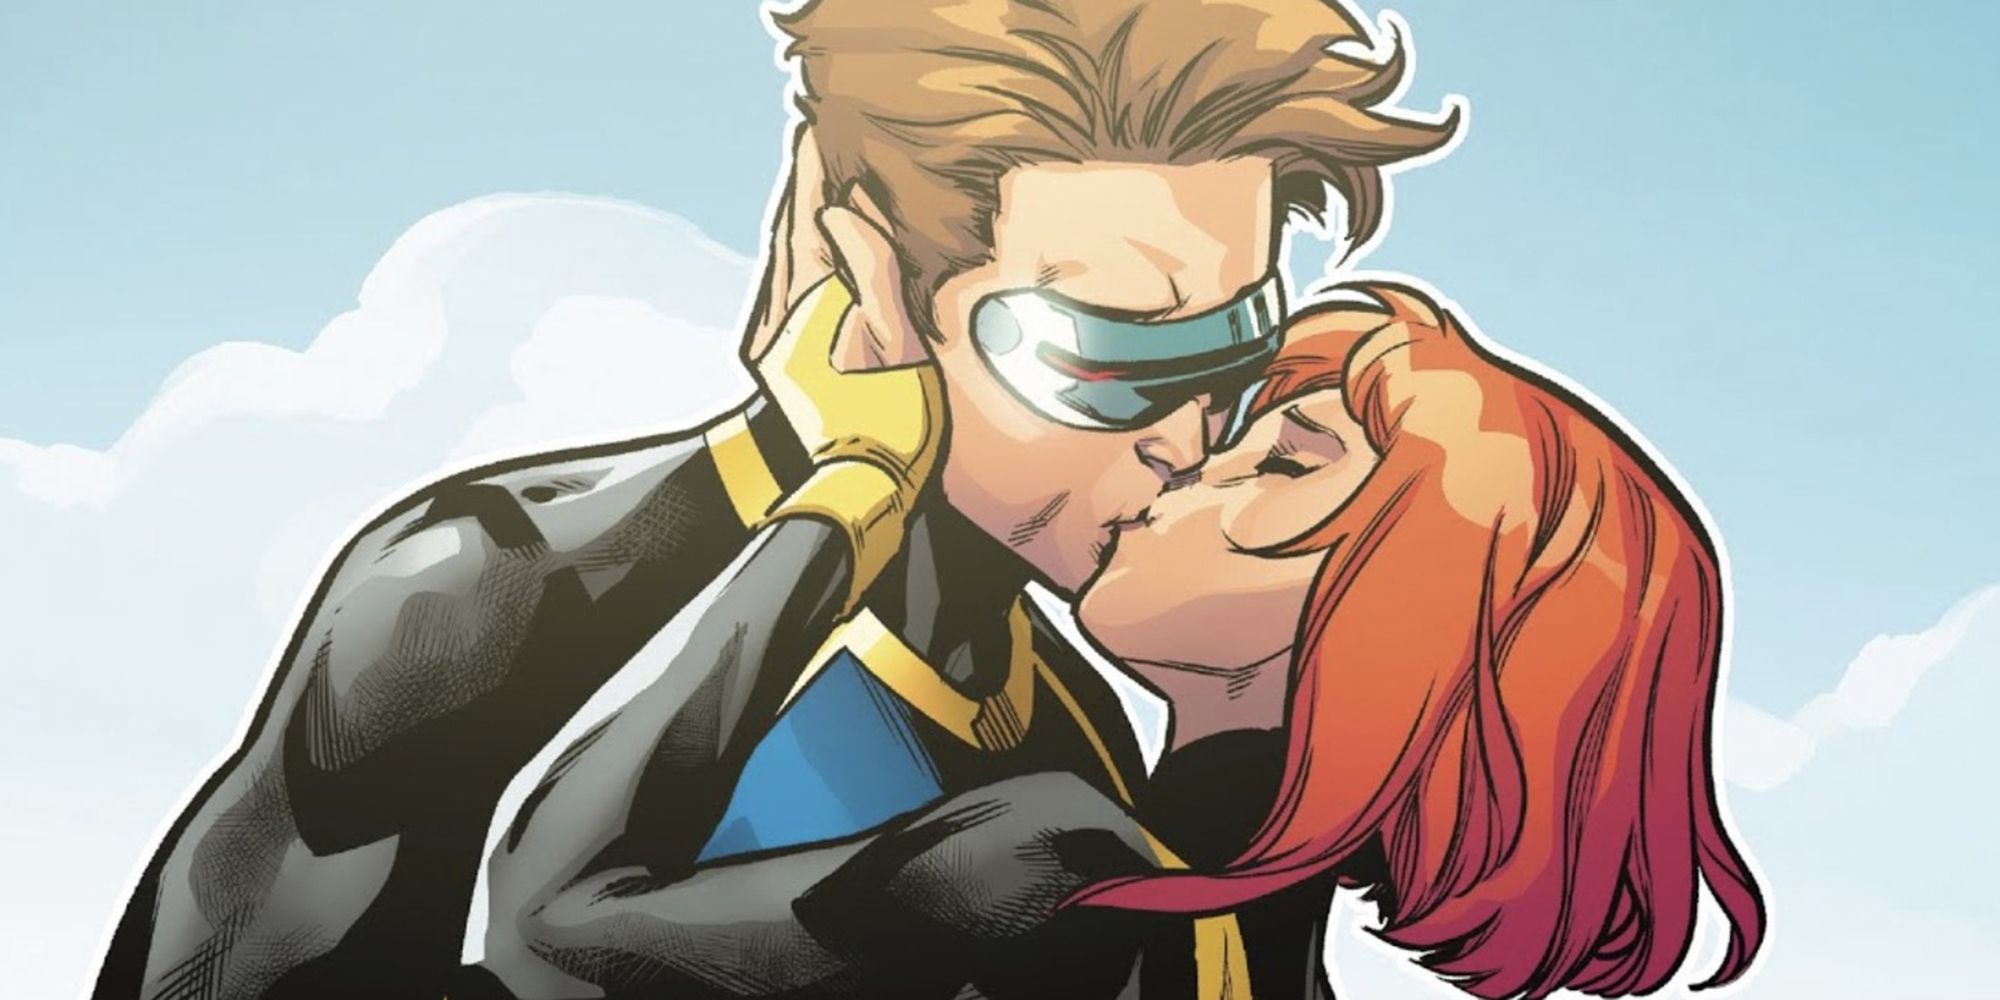 Scott Summers and Jean Grey